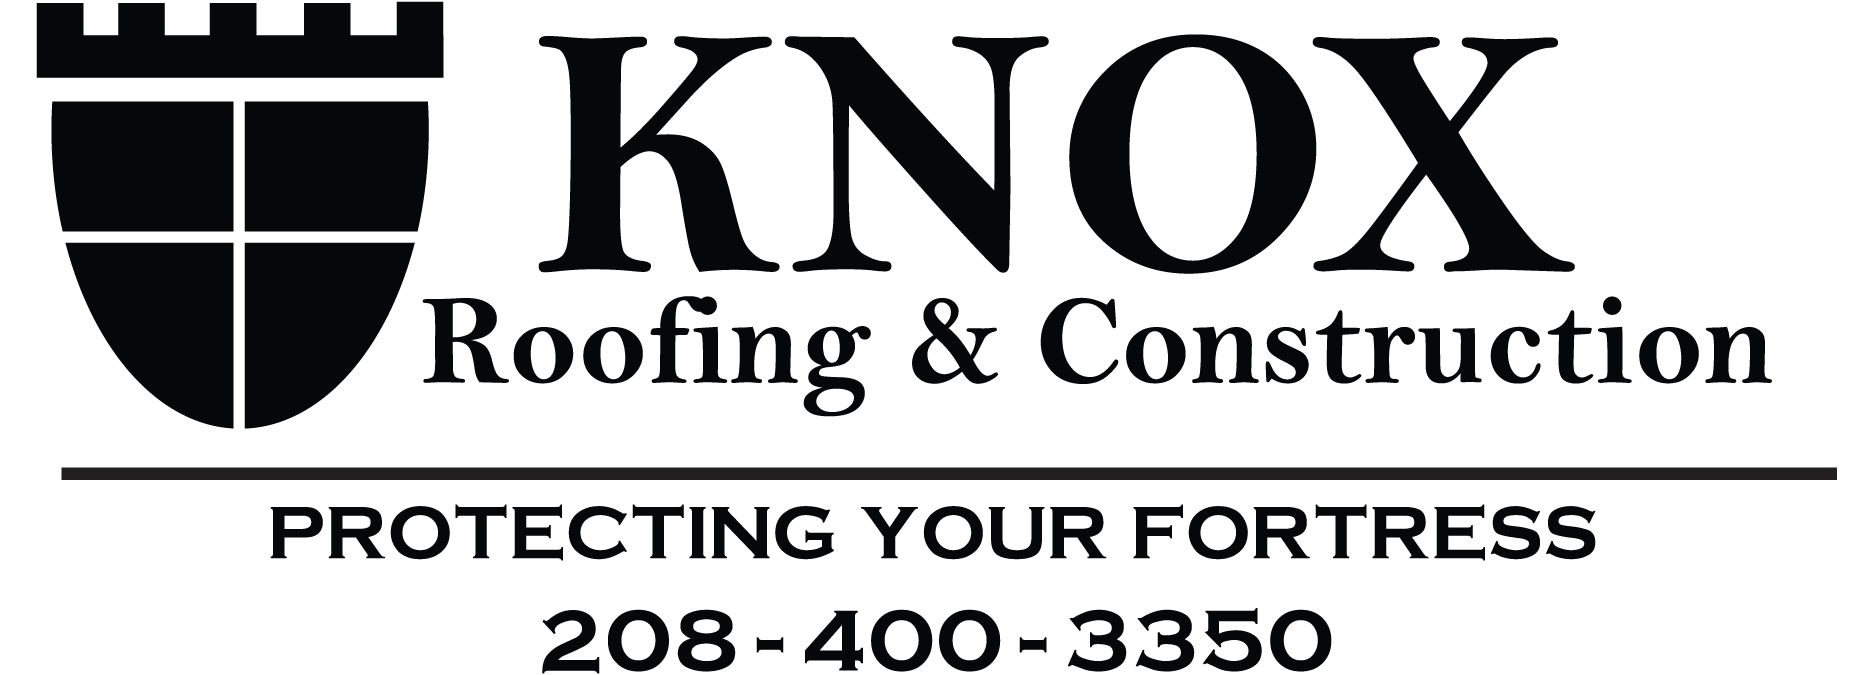 Knox Roofing & Construction, Inc. Logo